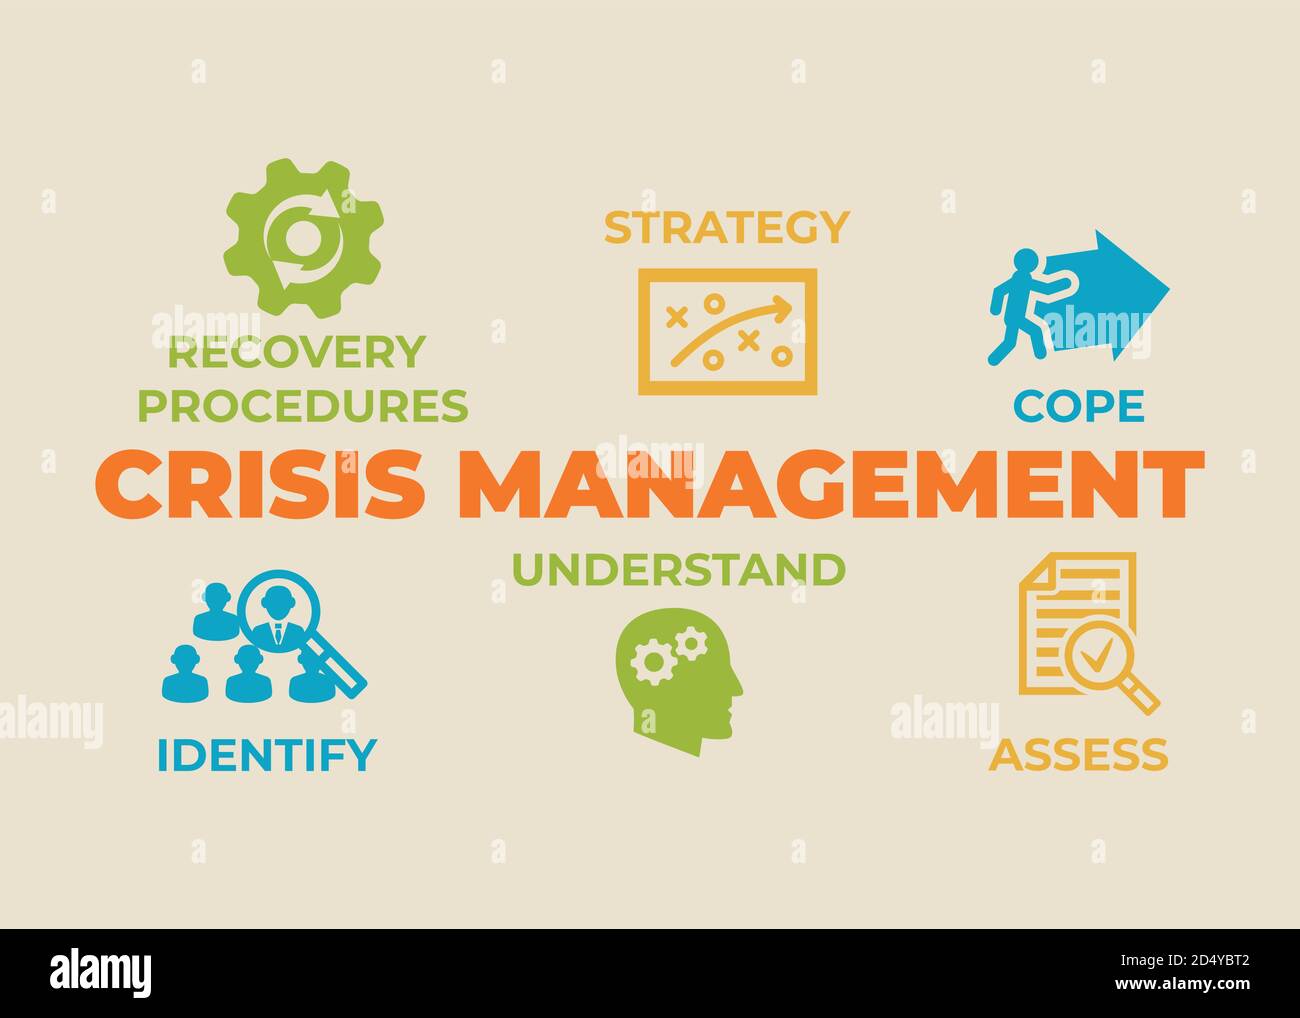 Crisis management Concept with icons and signs Stock Vector